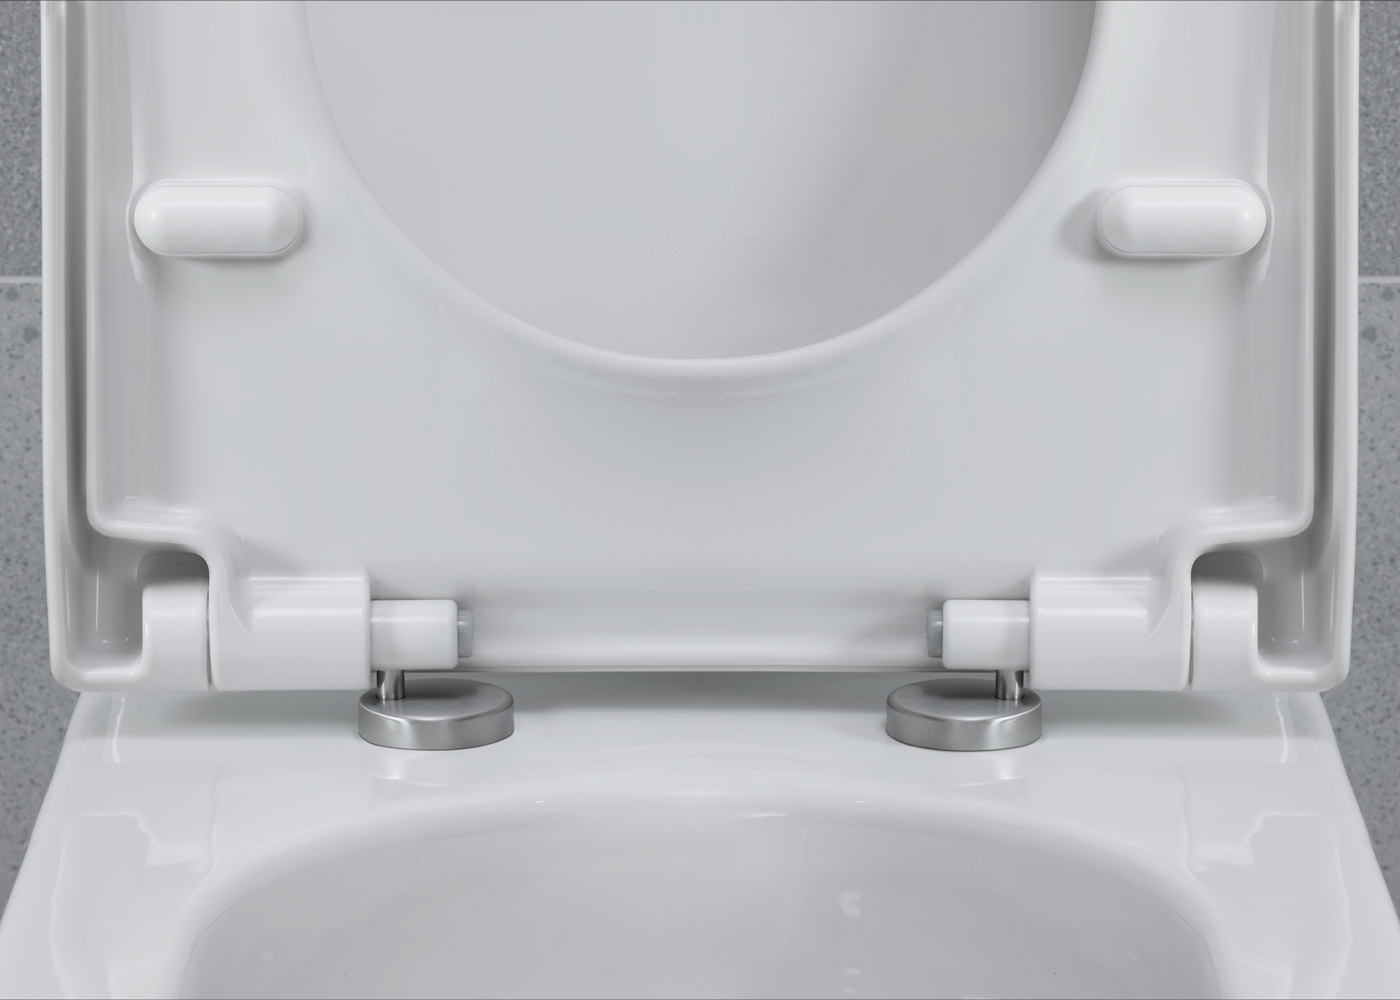 Starck 2 WC seat with stainless steel hinges
